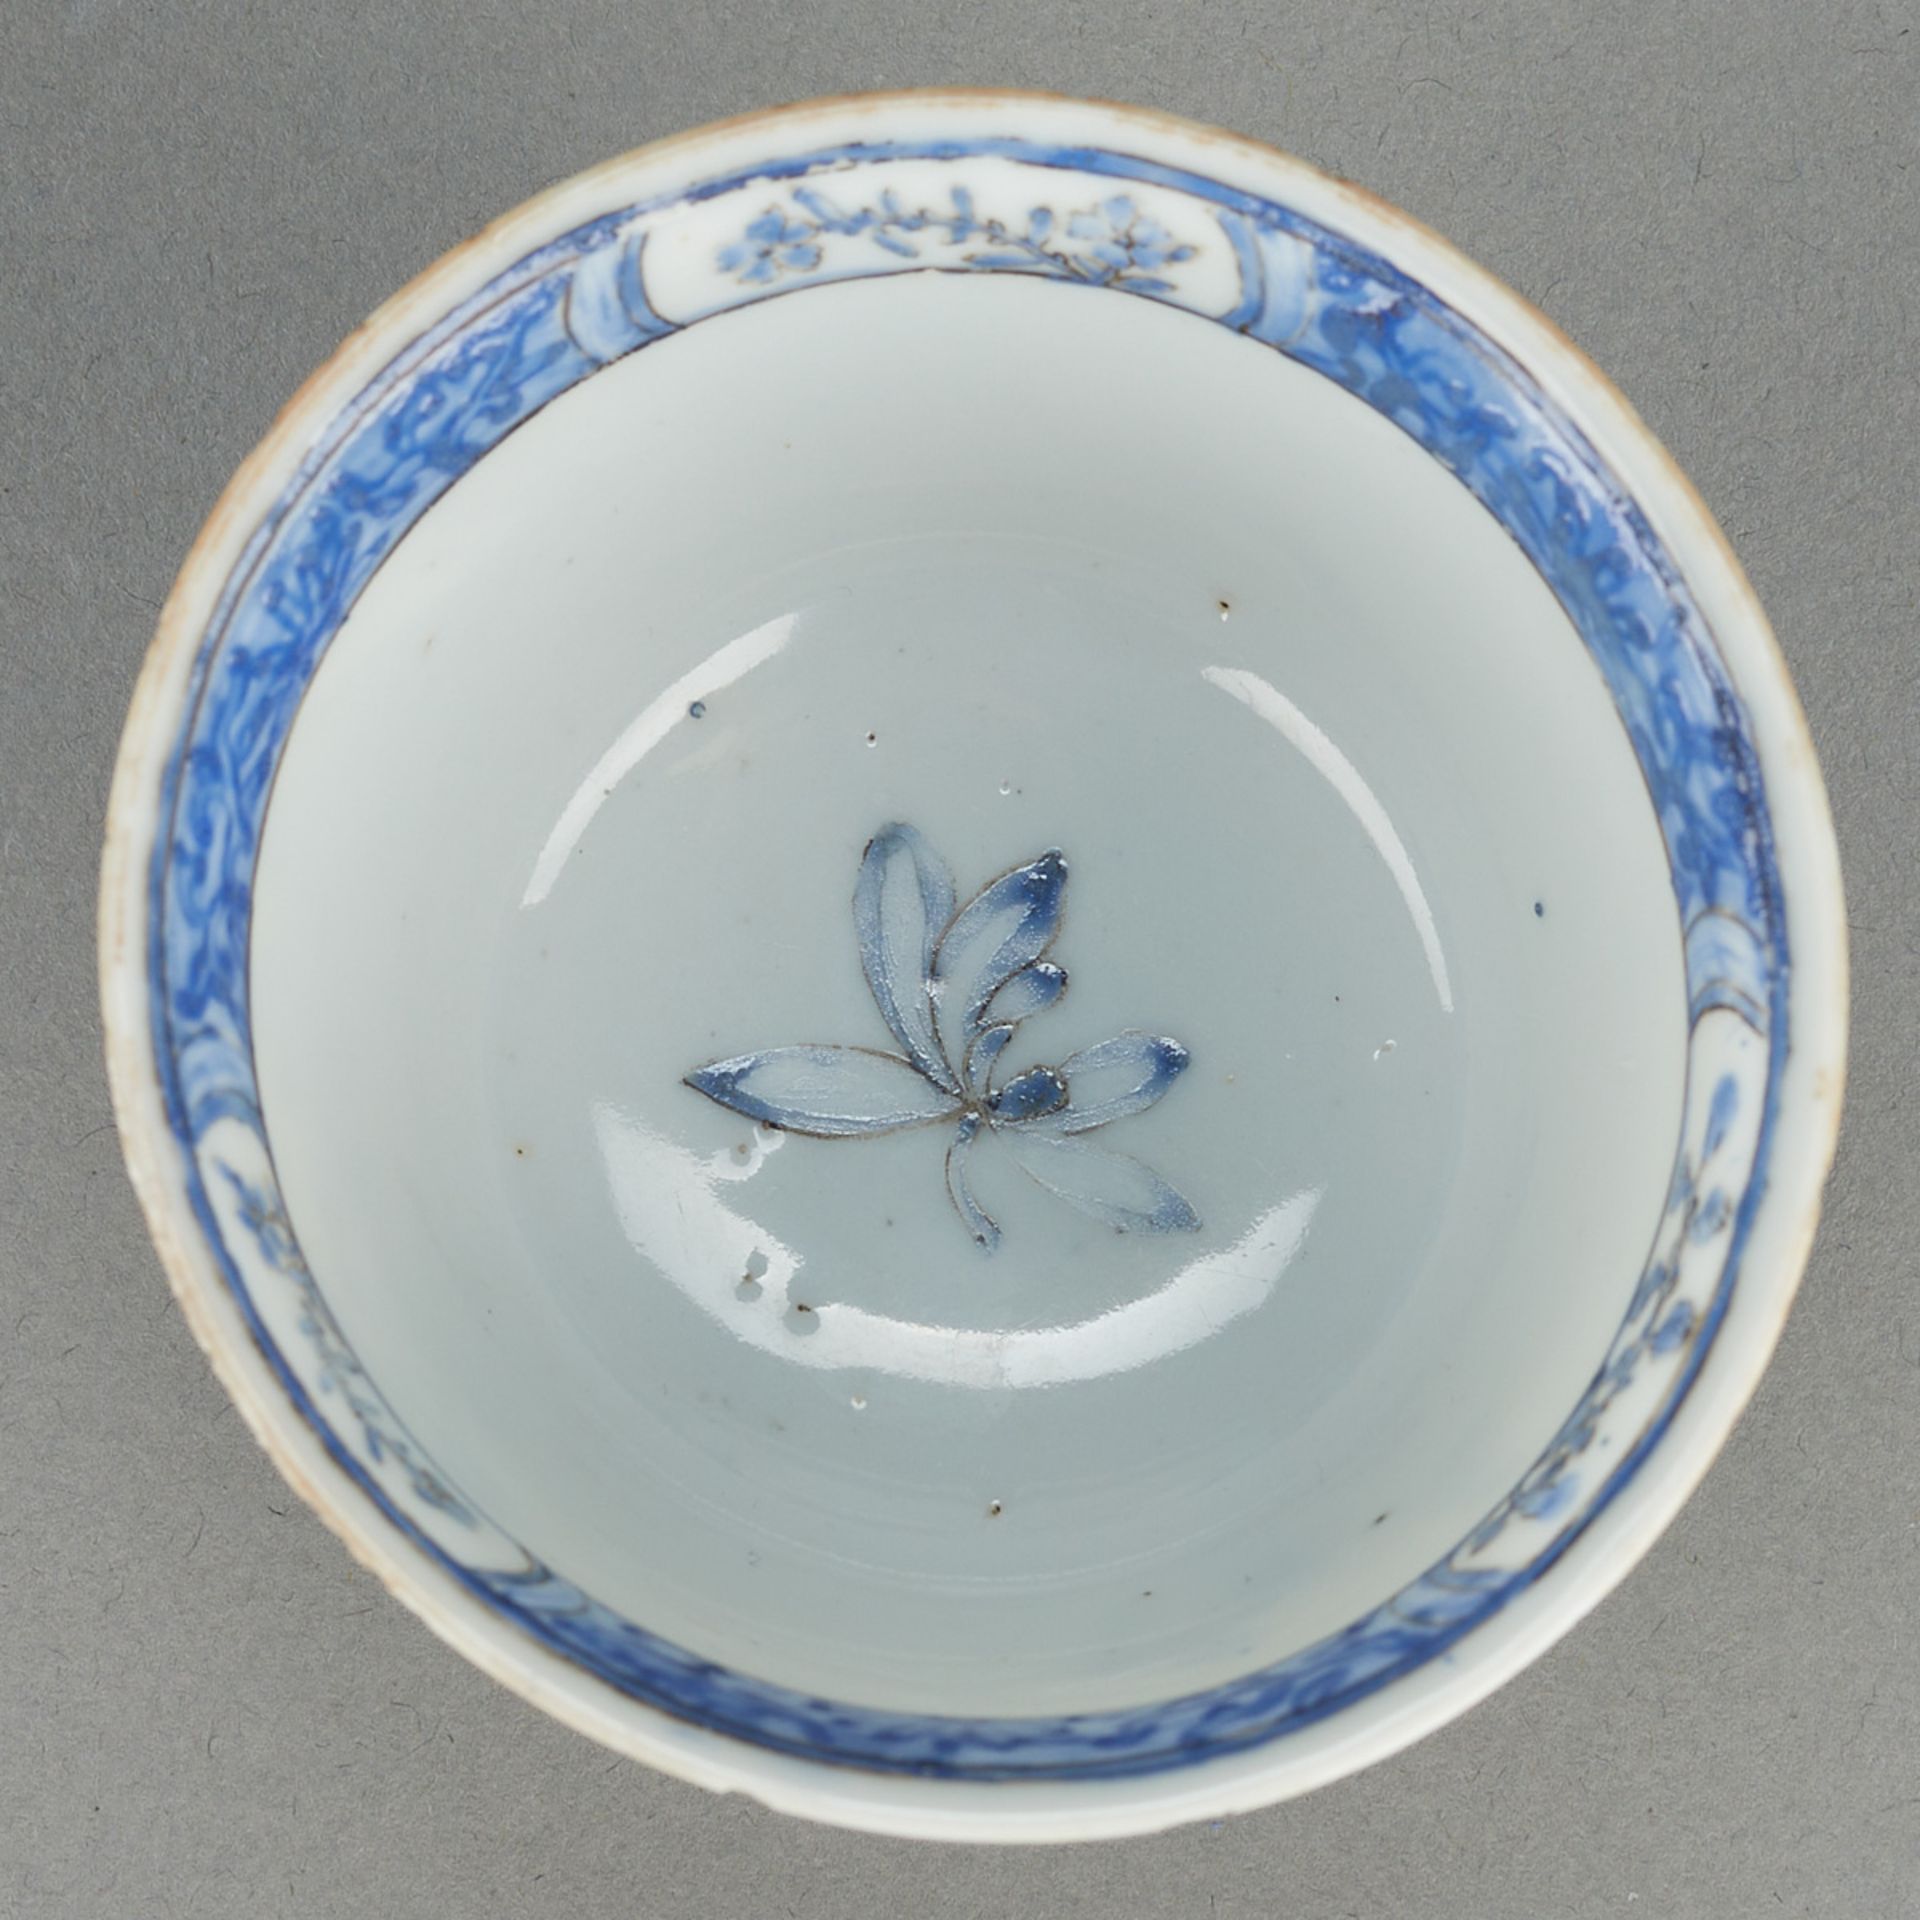 18th c. Chinese Porcelain Tea Bowl - Image 2 of 8